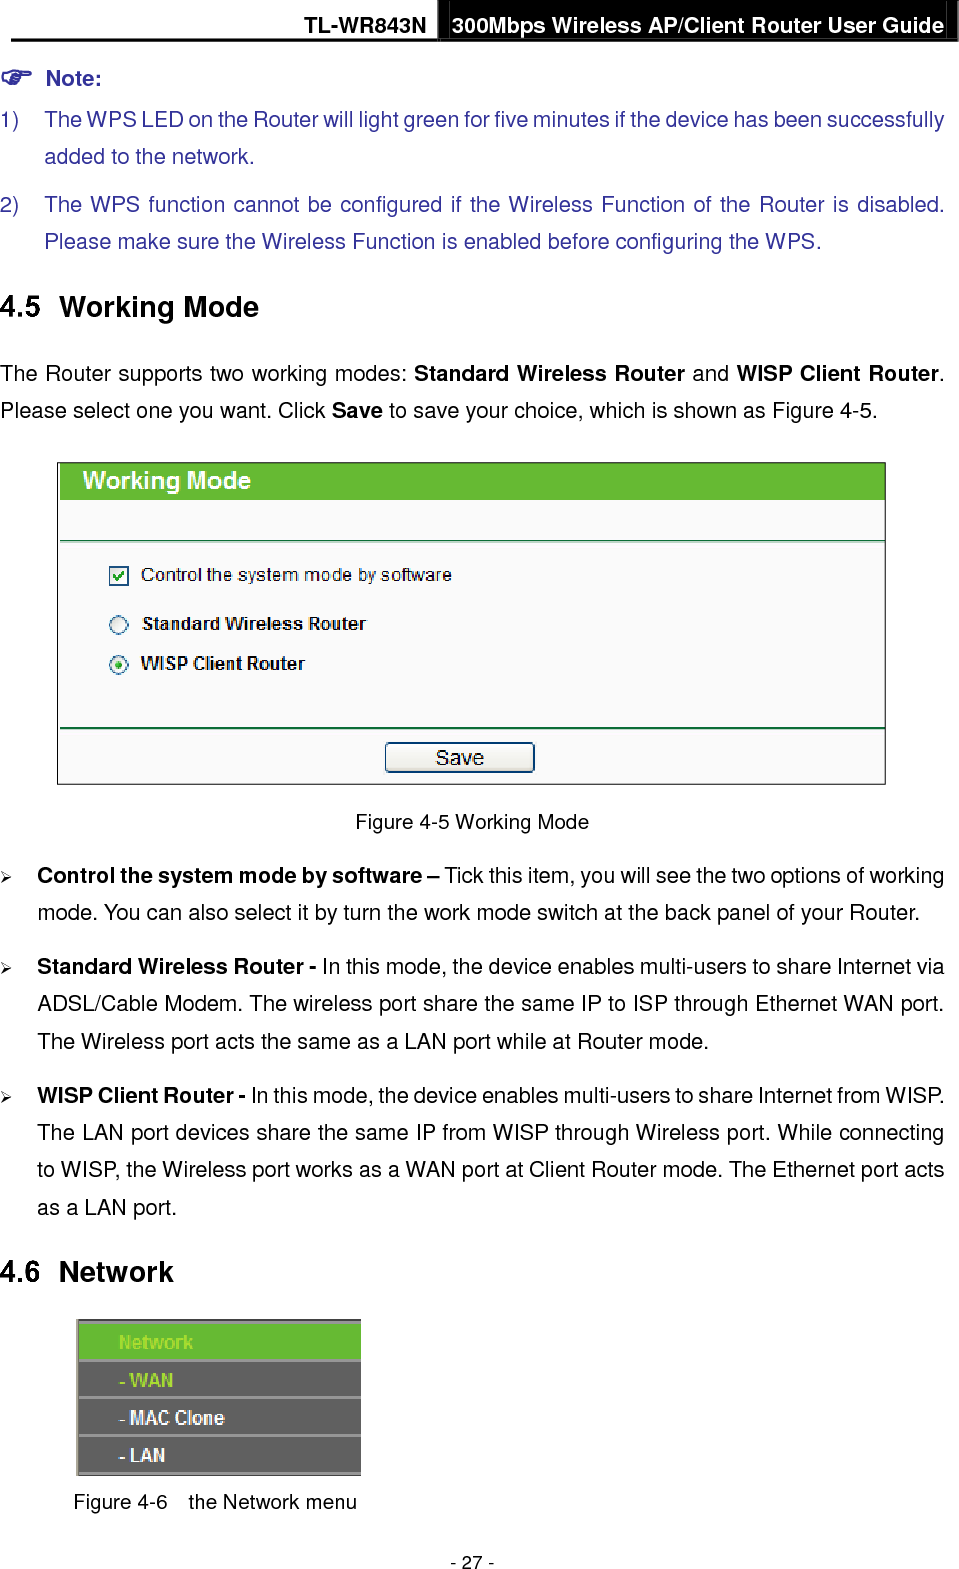 TL-WR843N 300Mbps Wireless AP/Client Router User Guide - 27 -  Note:1) The WPS LED on the Router will light green for five minutes if the device has been successfullyadded to the network.2) The WPS function cannot be configured if the Wireless Function of the Router is disabled.Please make sure the Wireless Function is enabled before configuring the WPS.Working Mode The Router supports two working modes: Standard Wireless Router and WISP Client Router. Please select one you want. Click Save to save your choice, which is shown as Figure 4-5. Figure 4-5 Working Mode Control the system mode by software – Tick this item, you will see the two options of workingmode. You can also select it by turn the work mode switch at the back panel of your Router.Standard Wireless Router - In this mode, the device enables multi-users to share Internet viaADSL/Cable Modem. The wireless port share the same IP to ISP through Ethernet WAN port.The Wireless port acts the same as a LAN port while at Router mode.WISP Client Router - In this mode, the device enables multi-users to share Internet from WISP.The LAN port devices share the same IP from WISP through Wireless port. While connectingto WISP, the Wireless port works as a WAN port at Client Router mode. The Ethernet port actsas a LAN port.Network Figure 4-6  the Network menu 